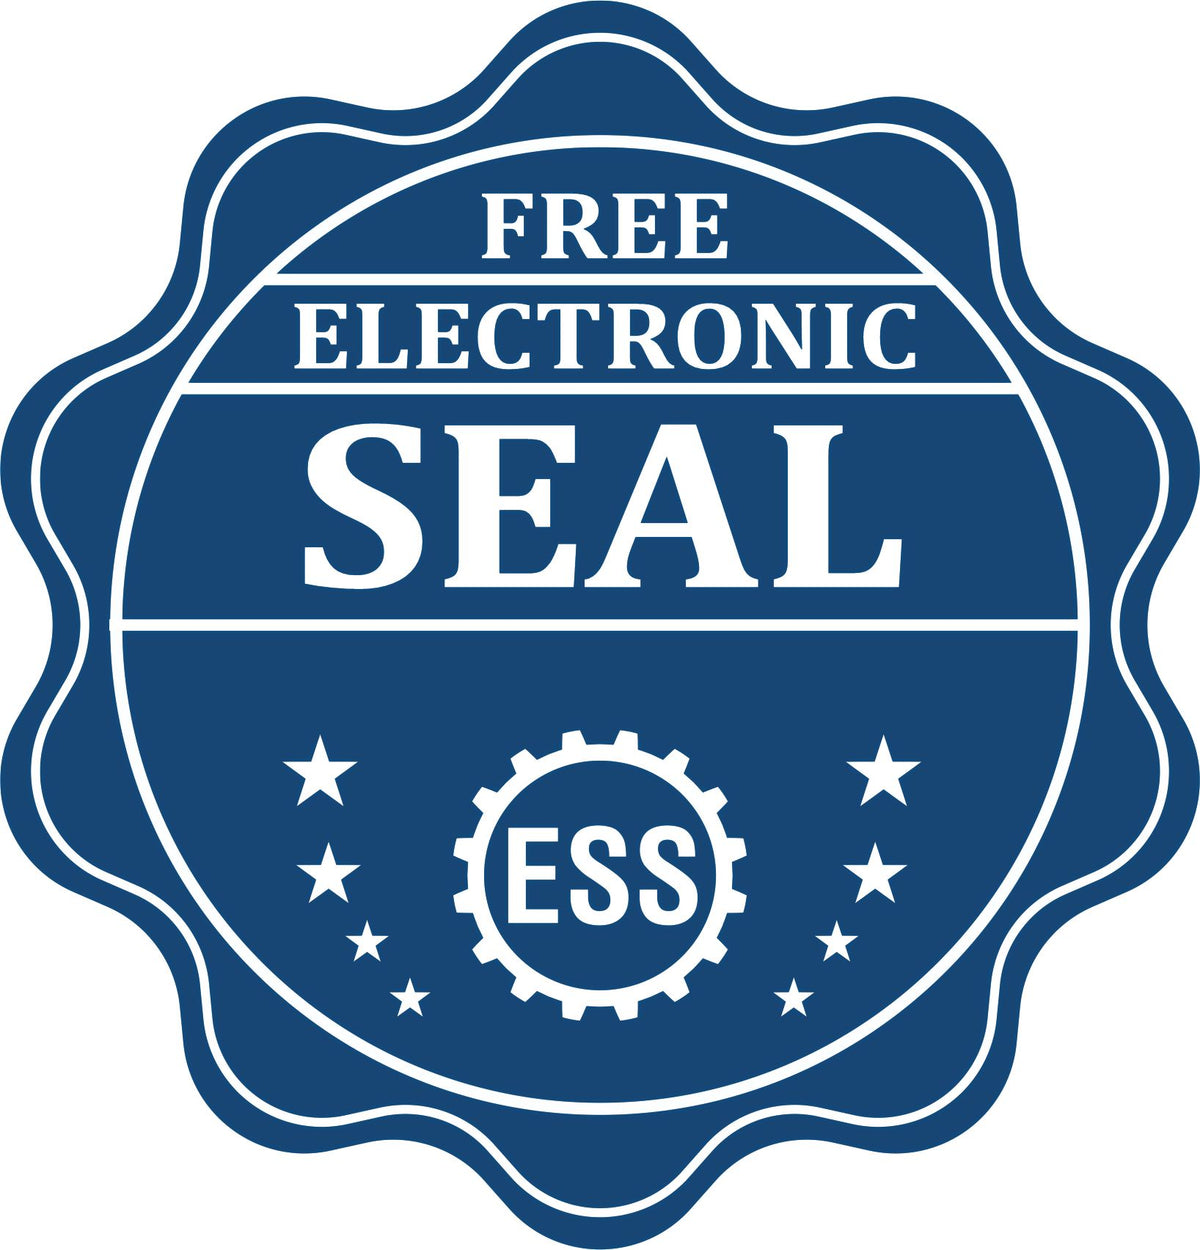 A badge showing a free electronic seal for the Gift Rhode Island Landscape Architect Seal with stars and the ESS gear on the emblem.